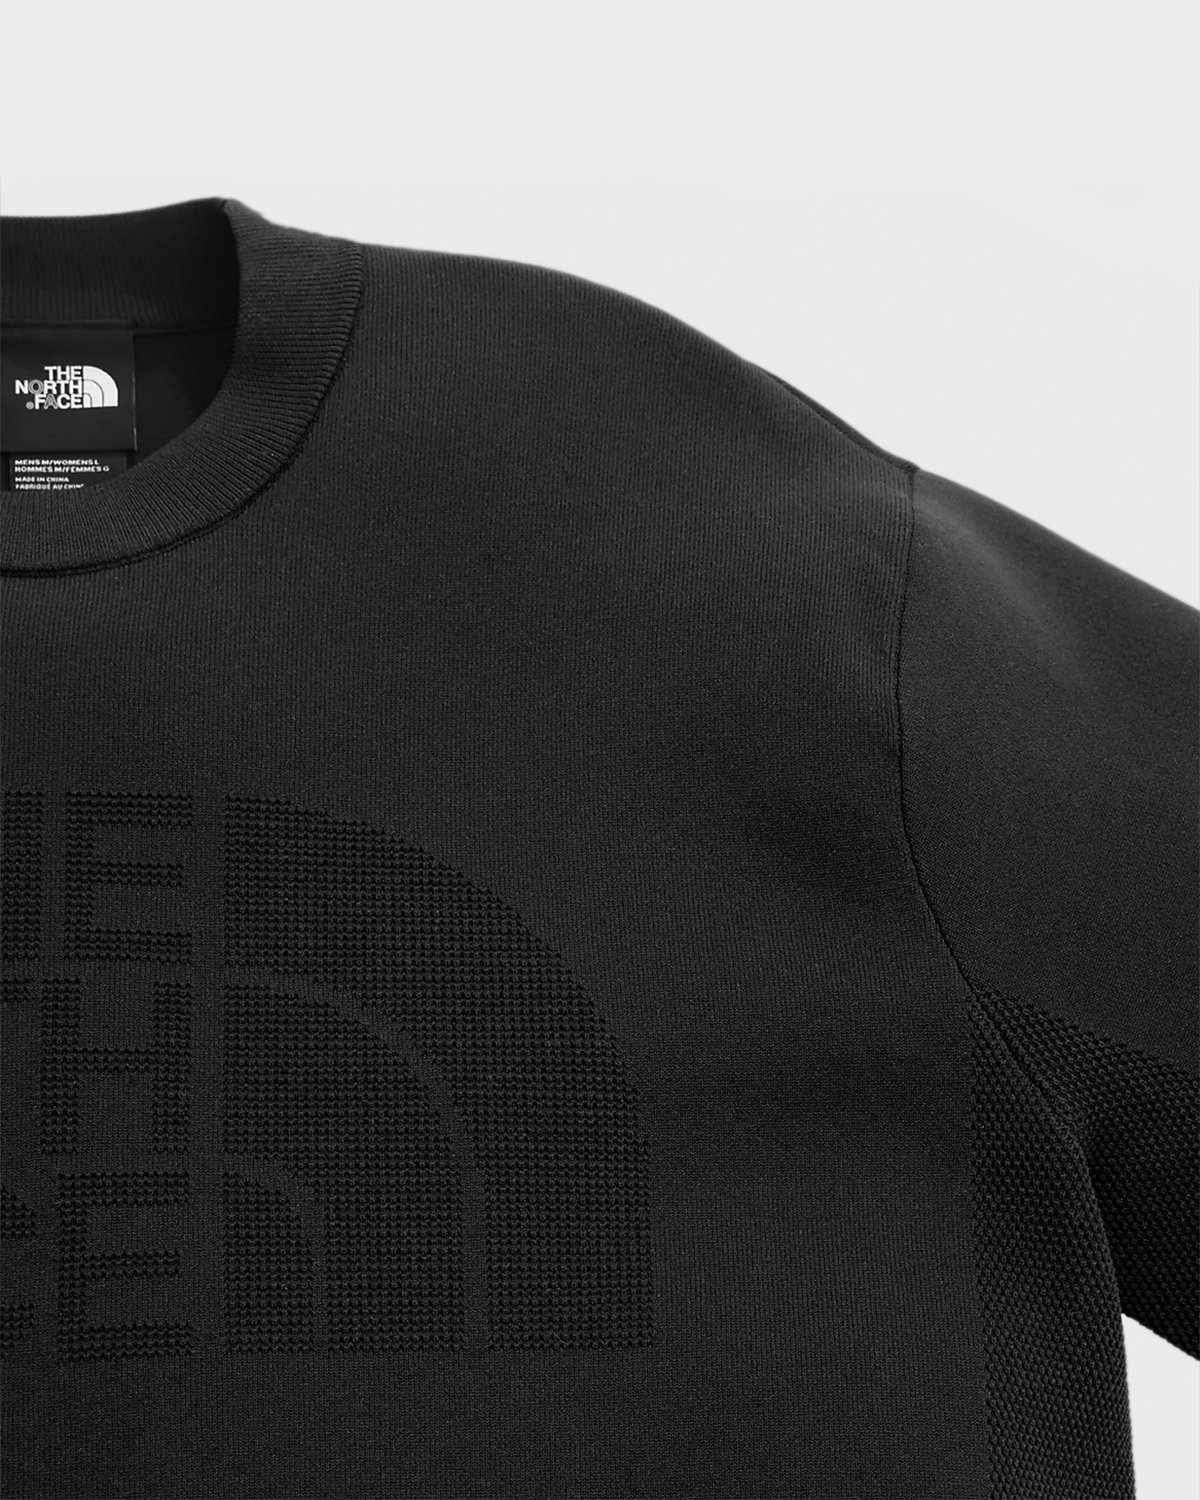 The North Face - Black Series Engineered Knit T-Shirt Black - Clothing - Black - Image 2